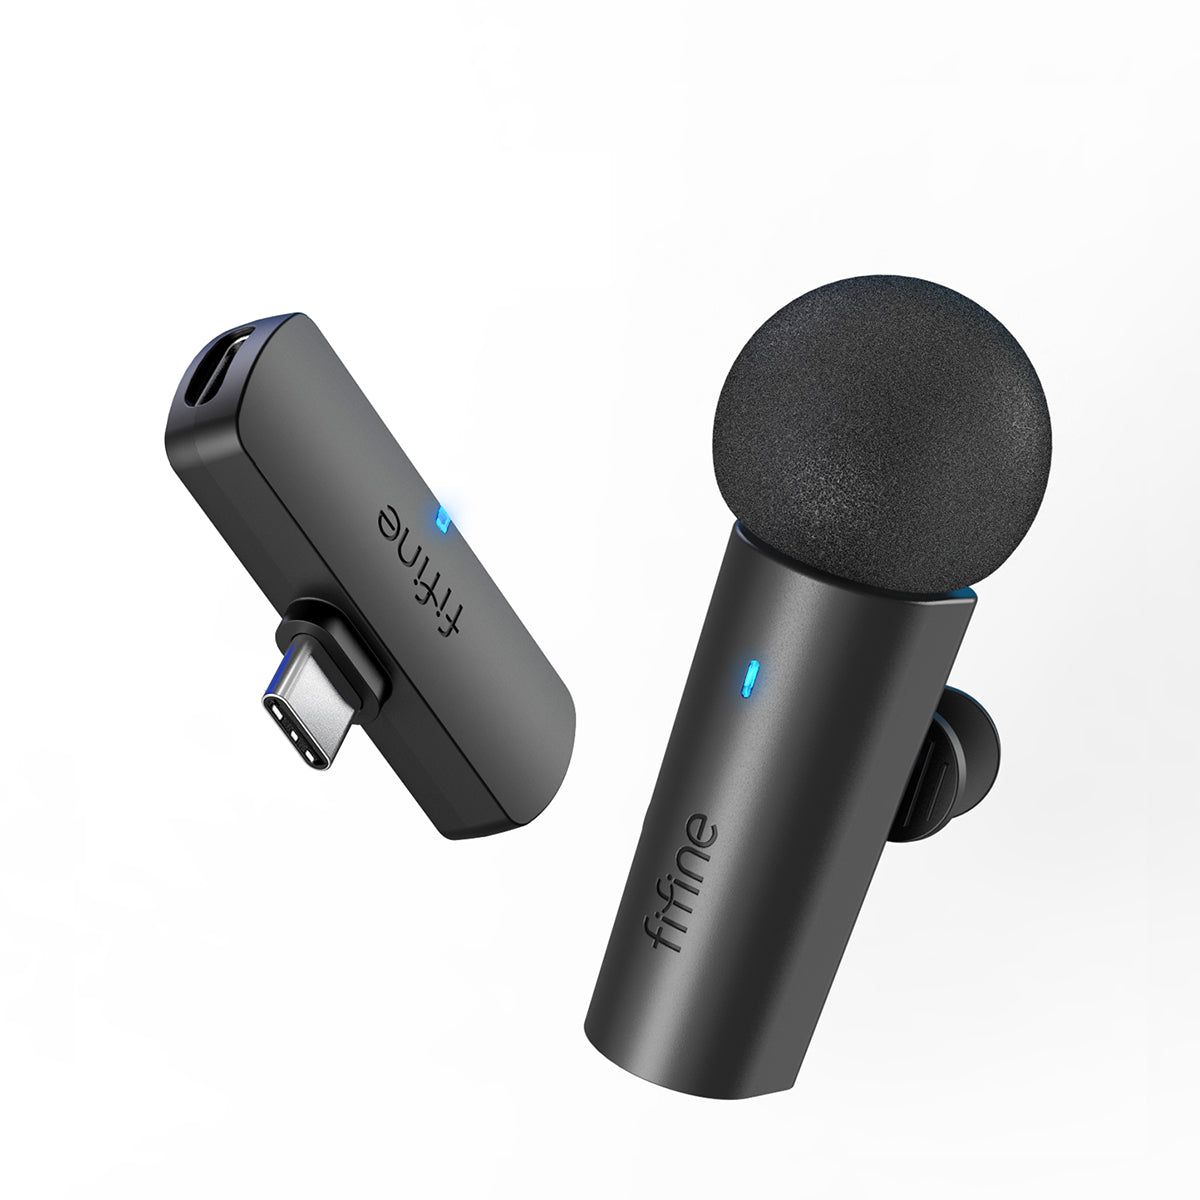 FIFINE M6 Wireless Lapel Microphone for Going Live on TikTok/Instagram, Recording vlog, Video Conferencing on USB-C Mobiles